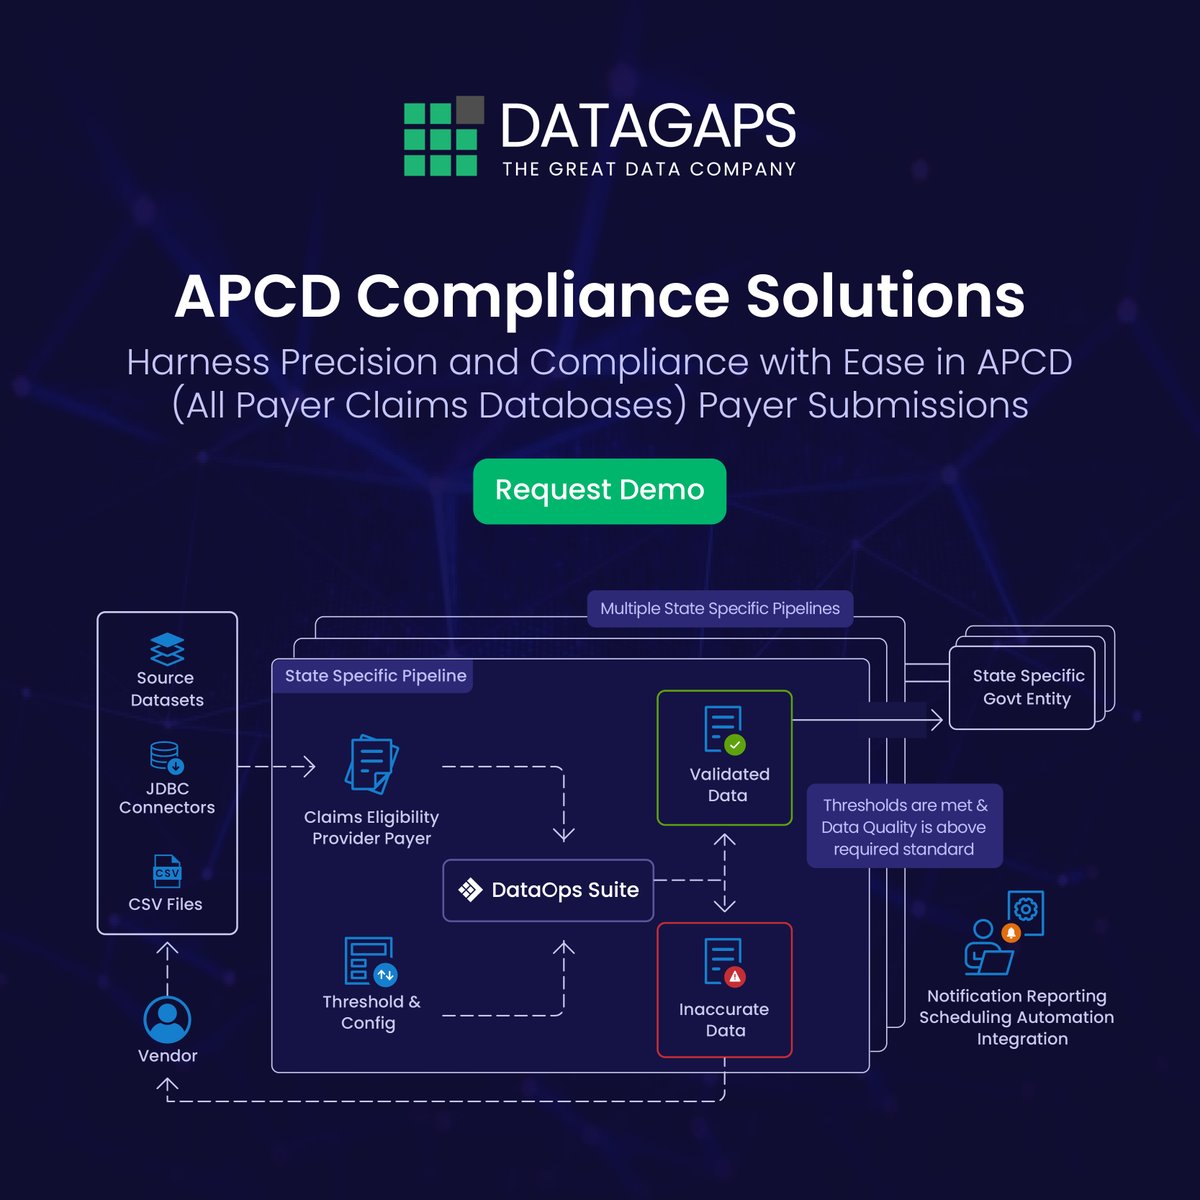 Effortless APCD compliance with ease!
@datagaps
deliver precision in healthcare payer submissions, ensuring full regulatory adherence. Get ready to transform your reporting process. 
#DataQuality #DataValidation #Healthcare #NAHDO #APCD
datagaps.com/apcd-lp/